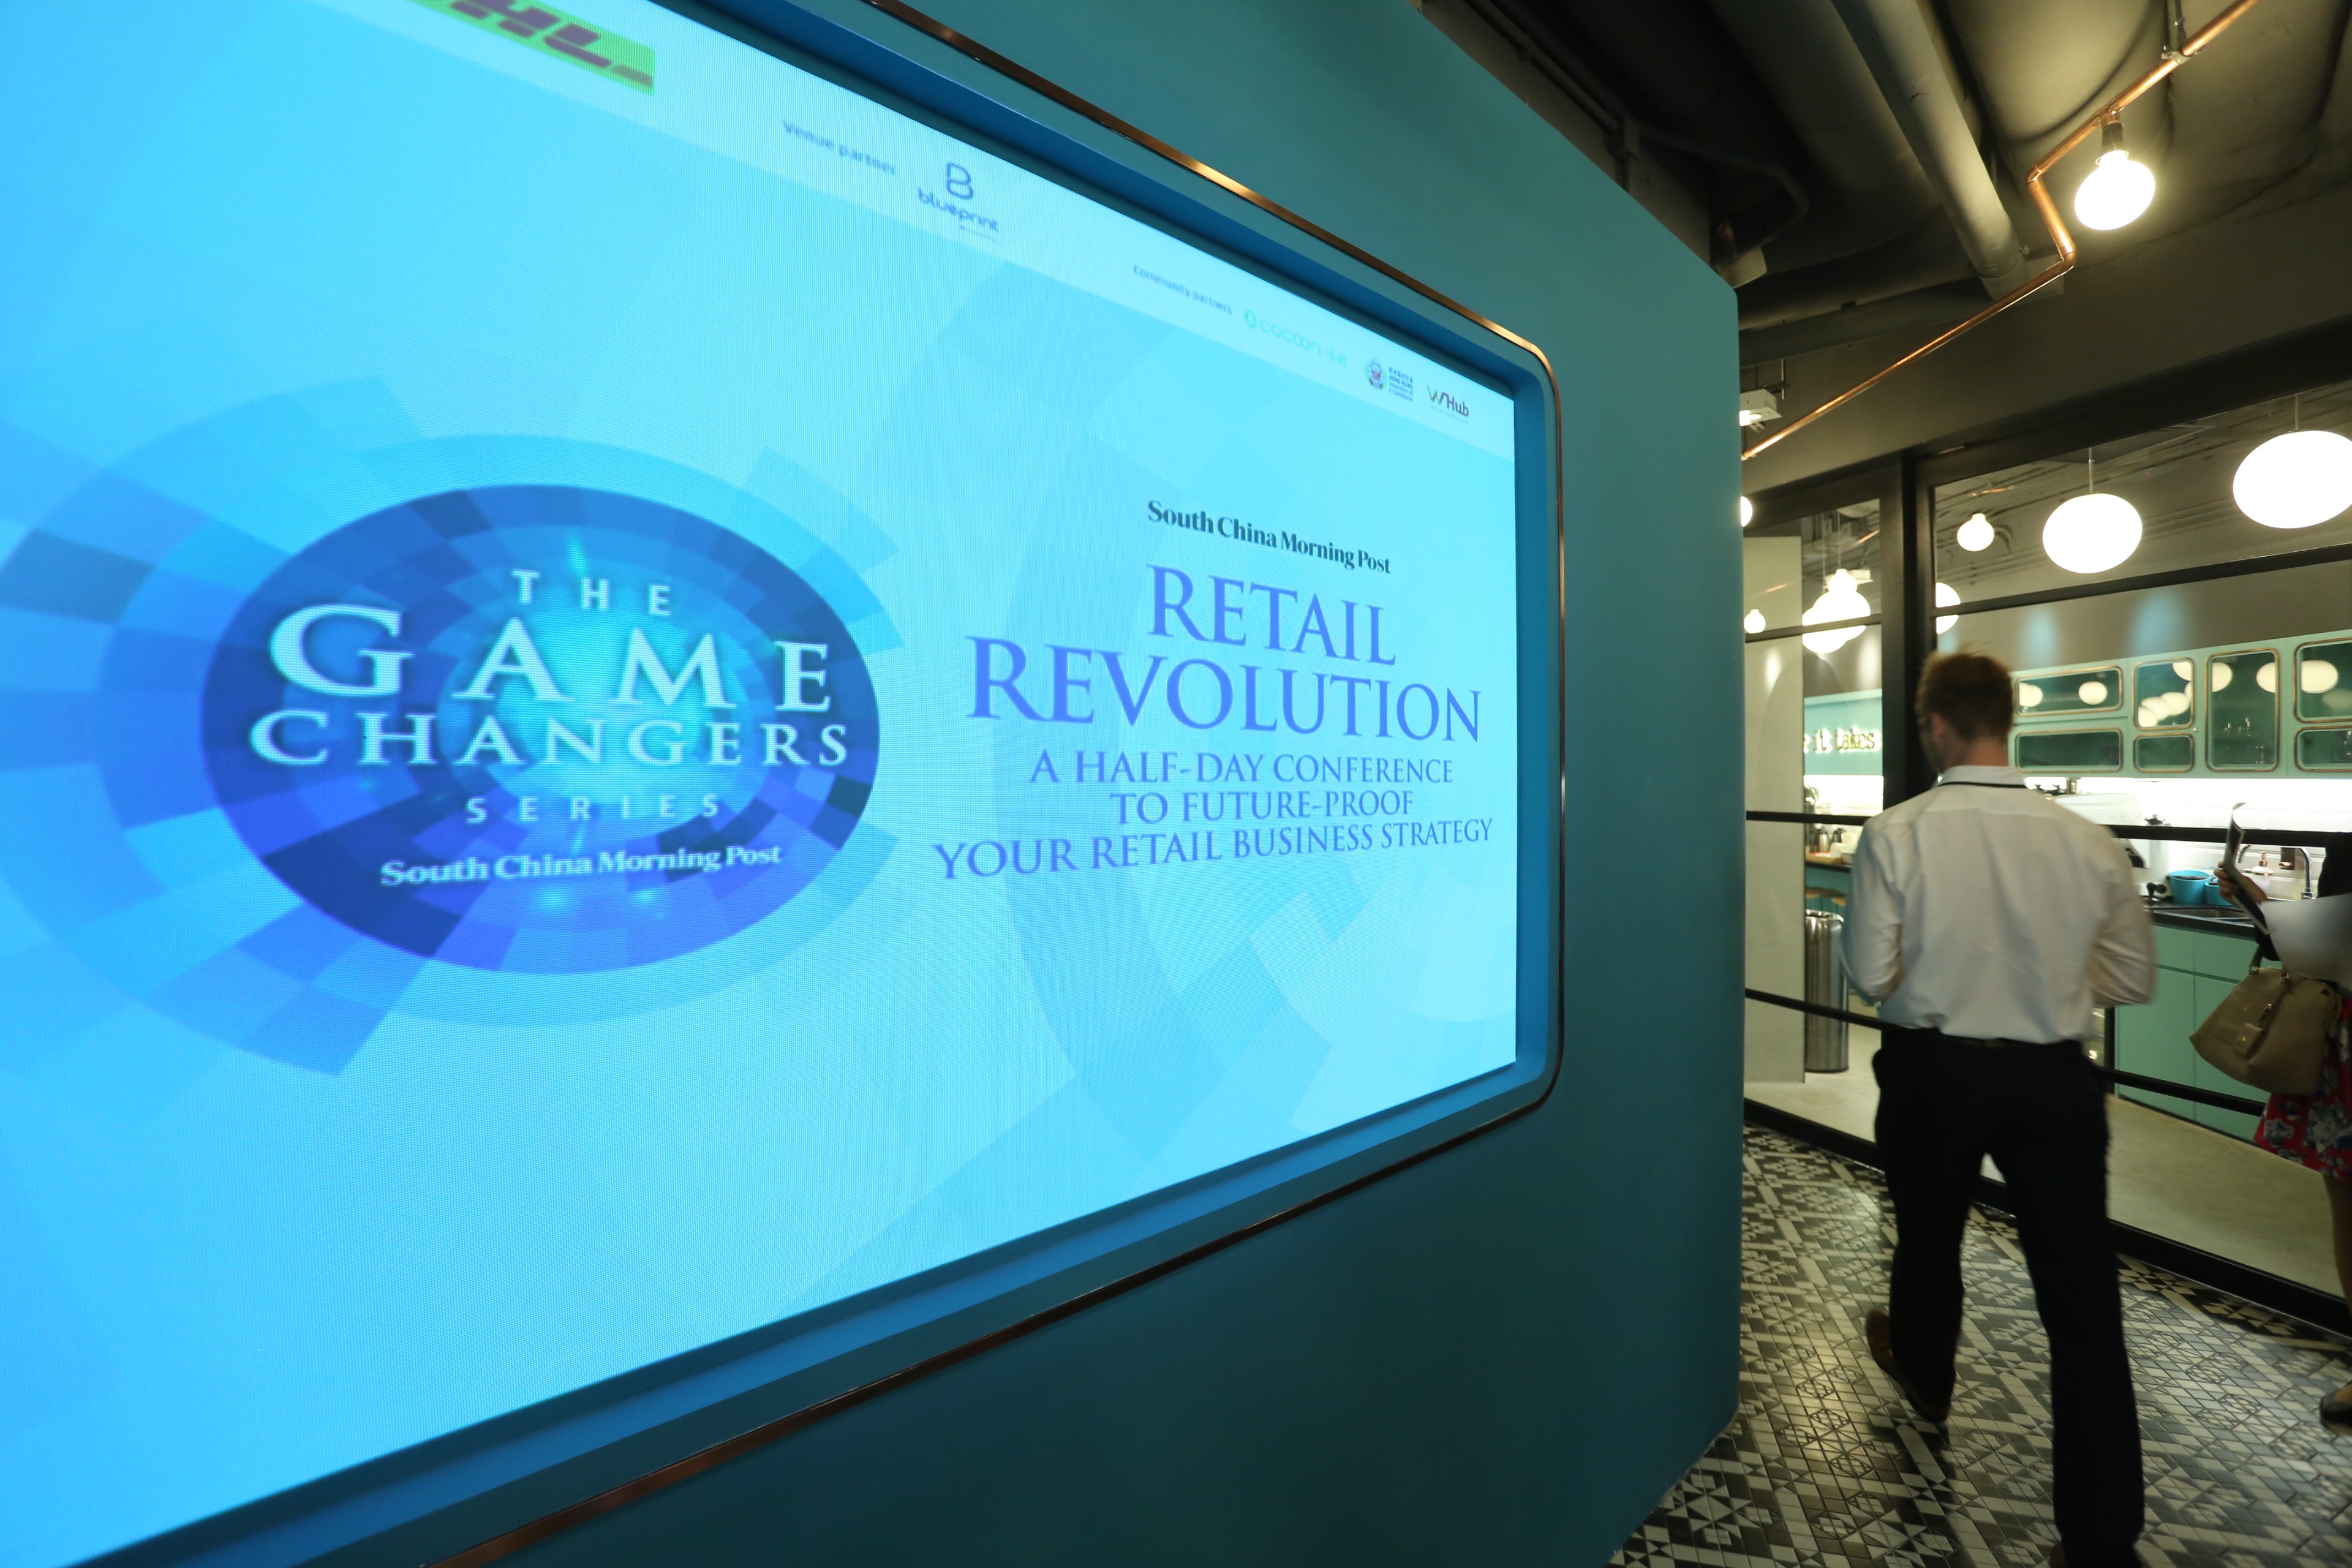 Experts gather at ‘Game Changers’ conference in Hong Kong to discuss moves that will shape the next retail revolution